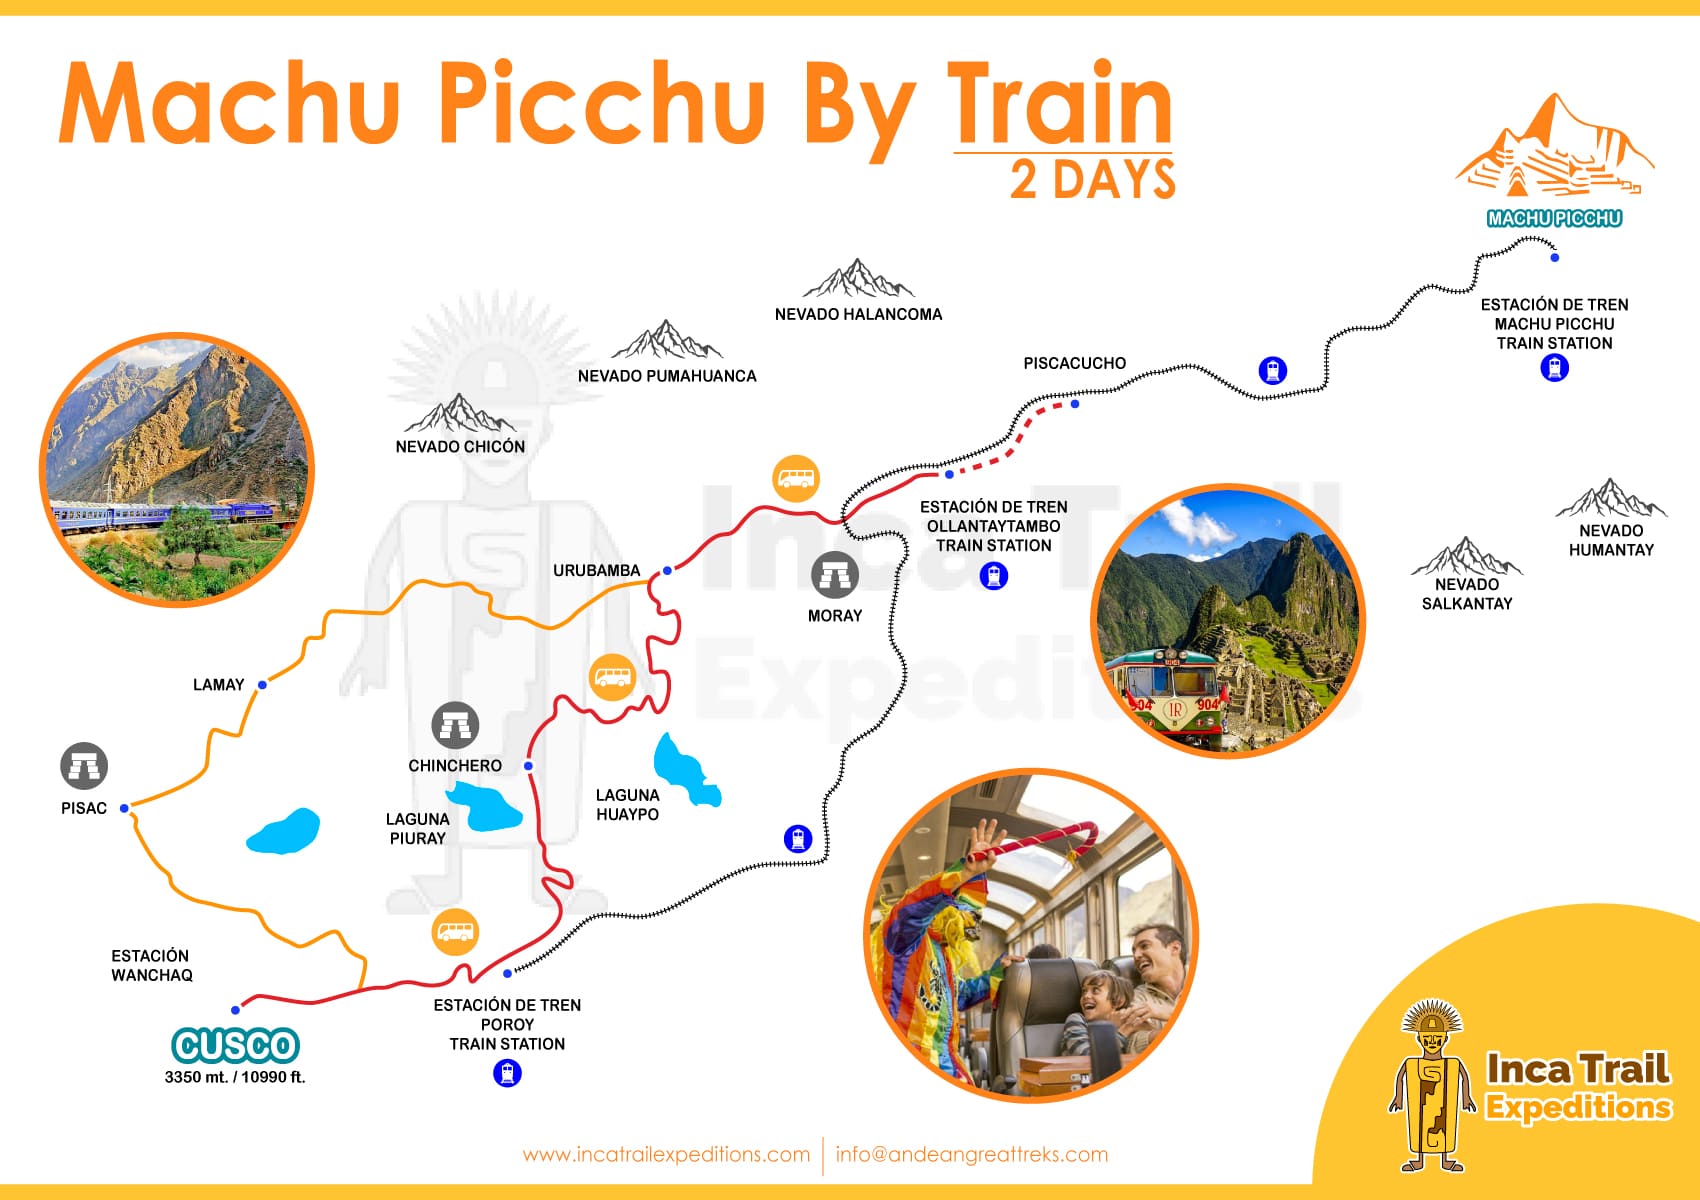 MACHUPICCHU-BY-TRAIN-2-DAYS-BY-INCA-TRAIL-EXPEDITIONS